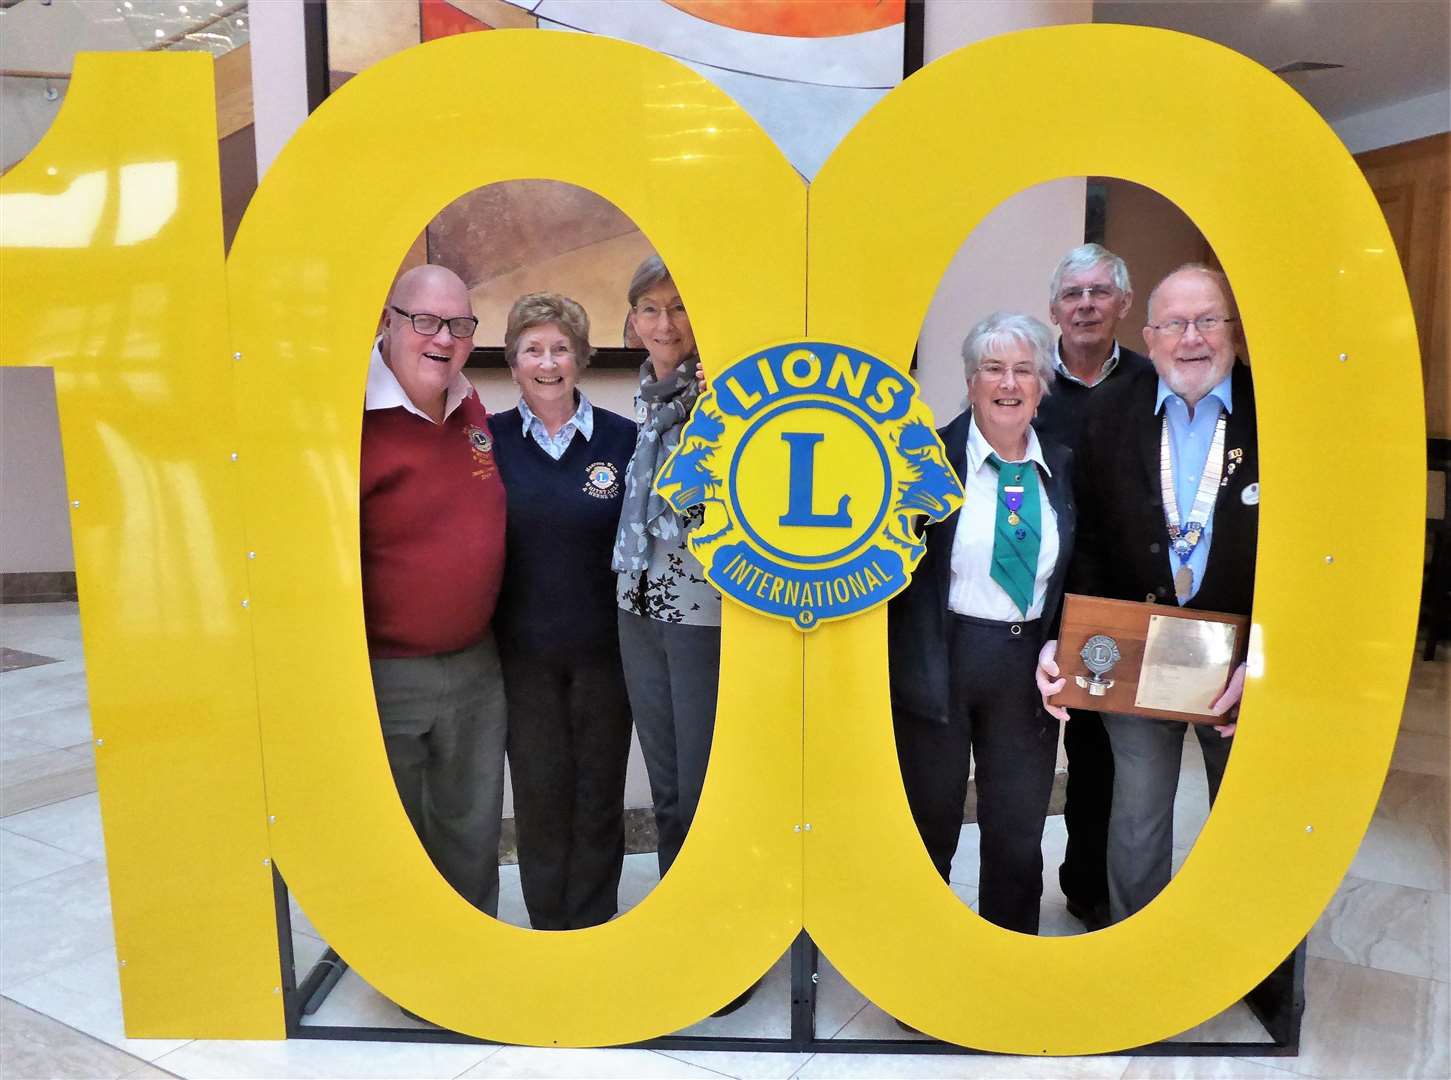 Members of Whitstable and Herne Bay Lions Club.